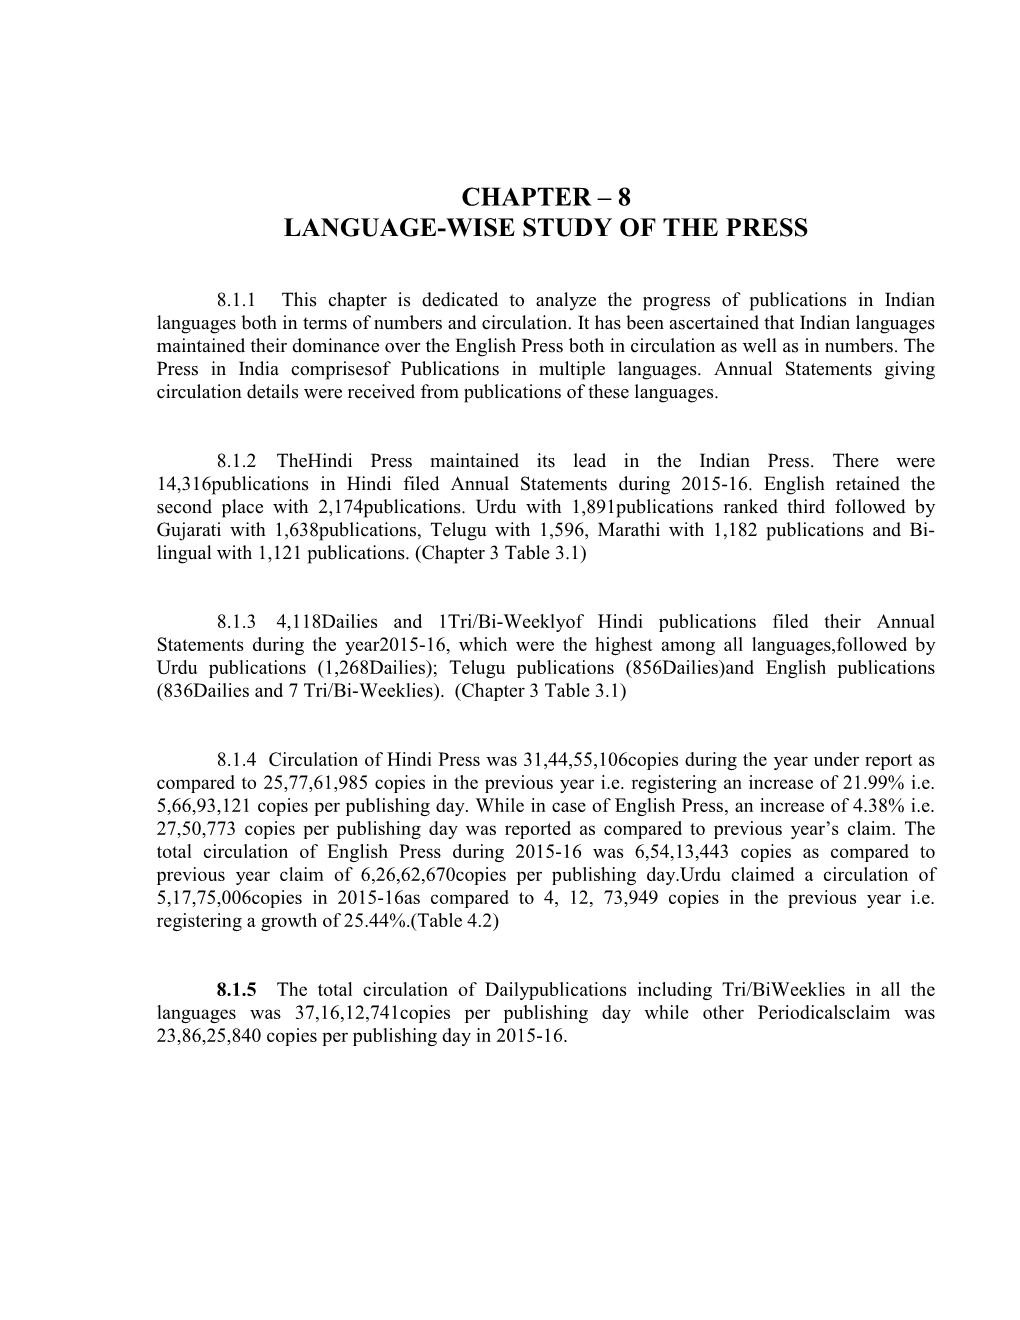 Chapter – 8 Language-Wise Study of the Press